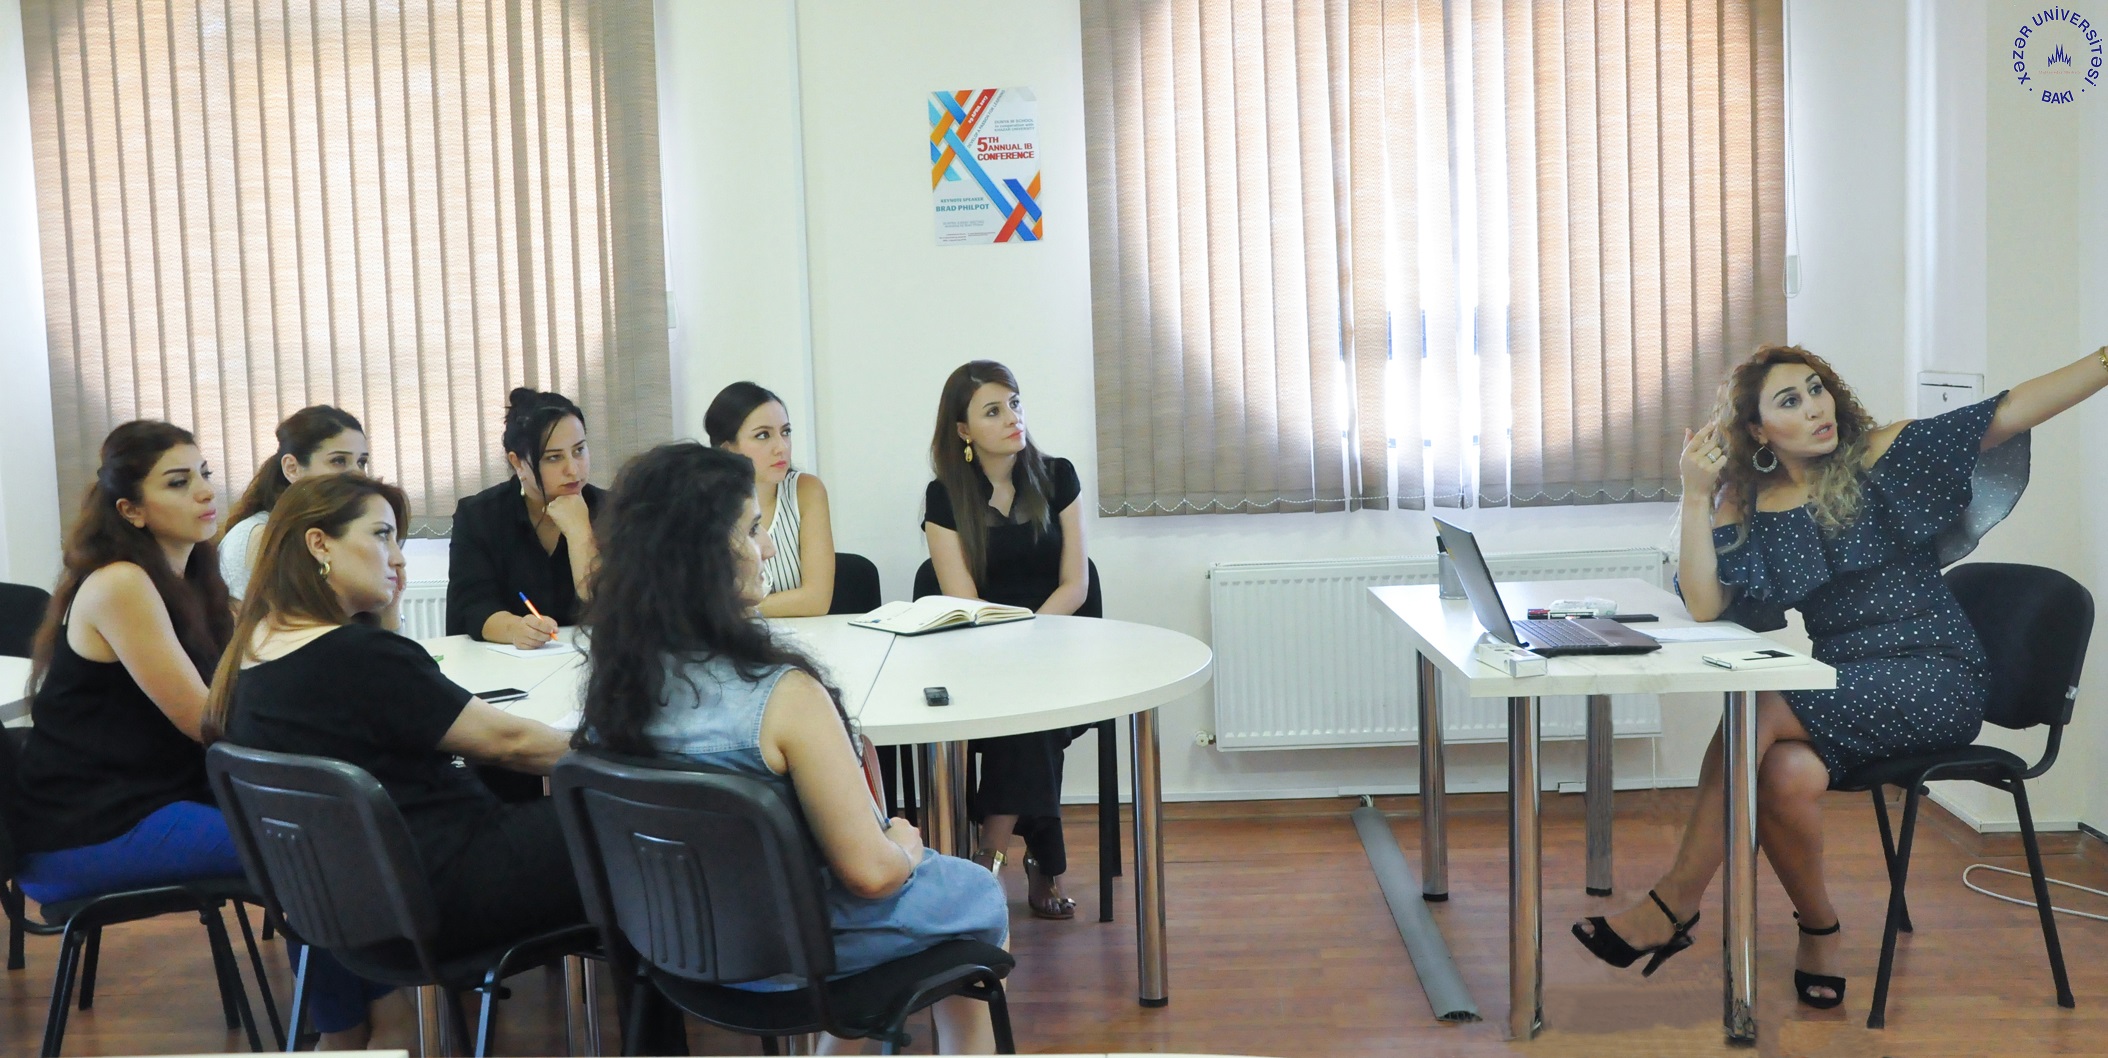 The Library-Information Center conducted a training on electronic services